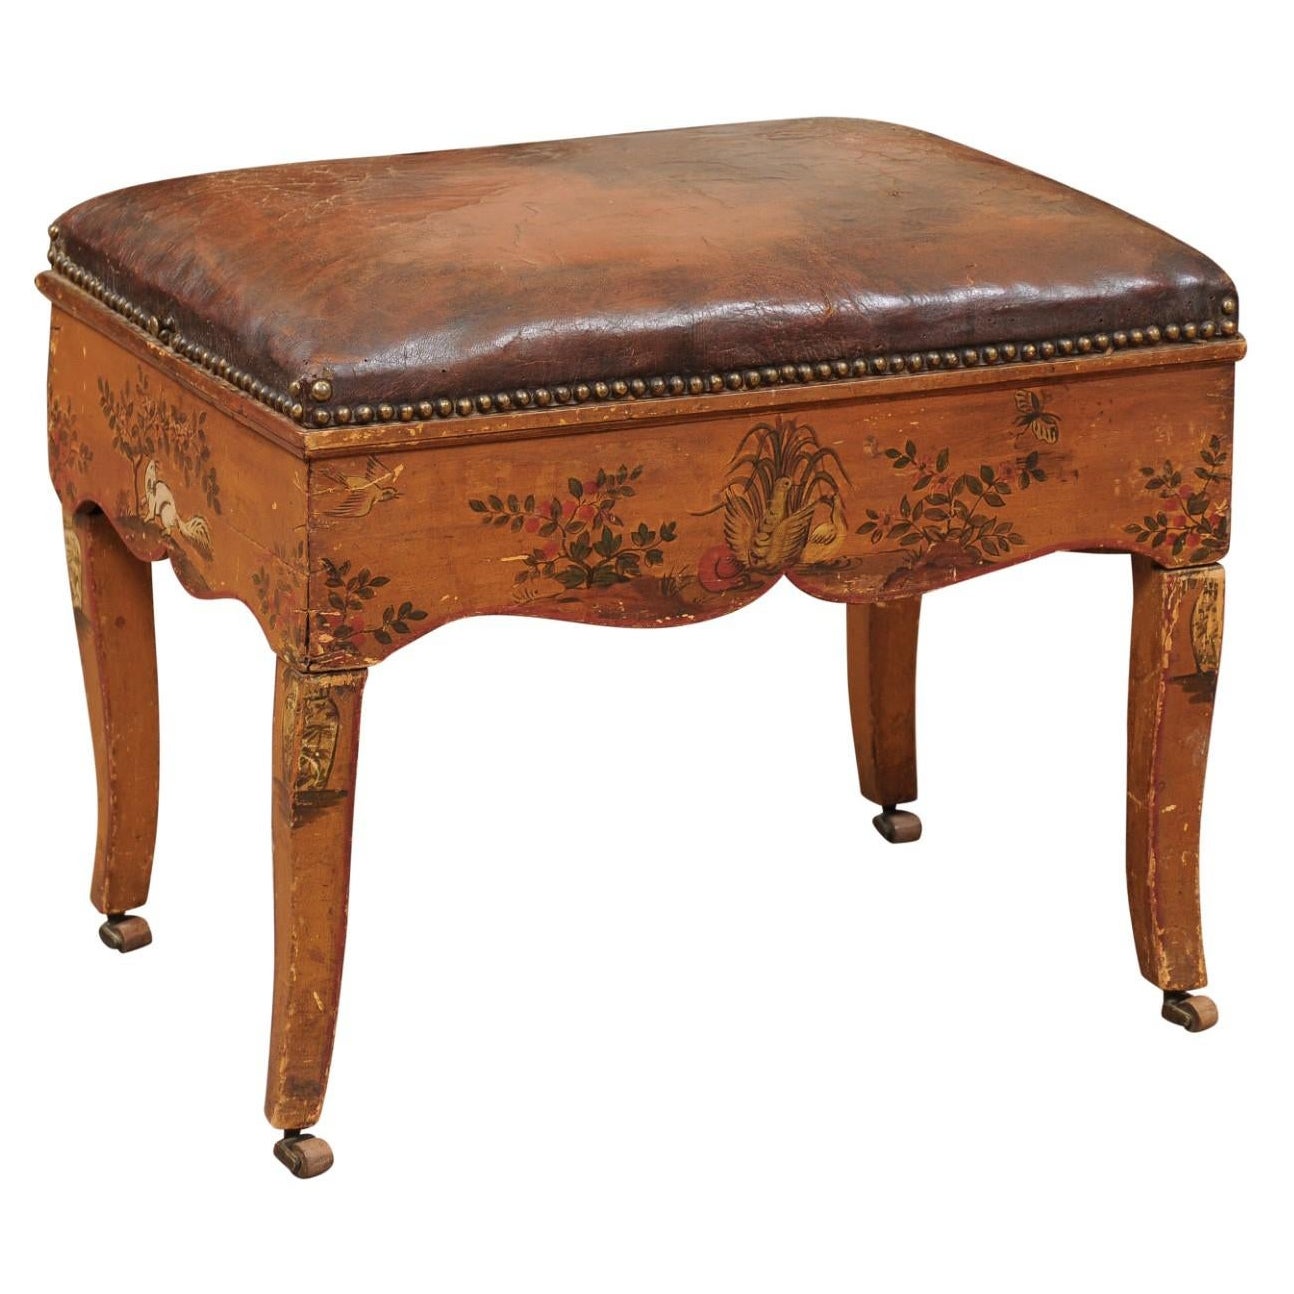 18th Century Italian Stool with Painted Decoration & Leather Upholstered Seat